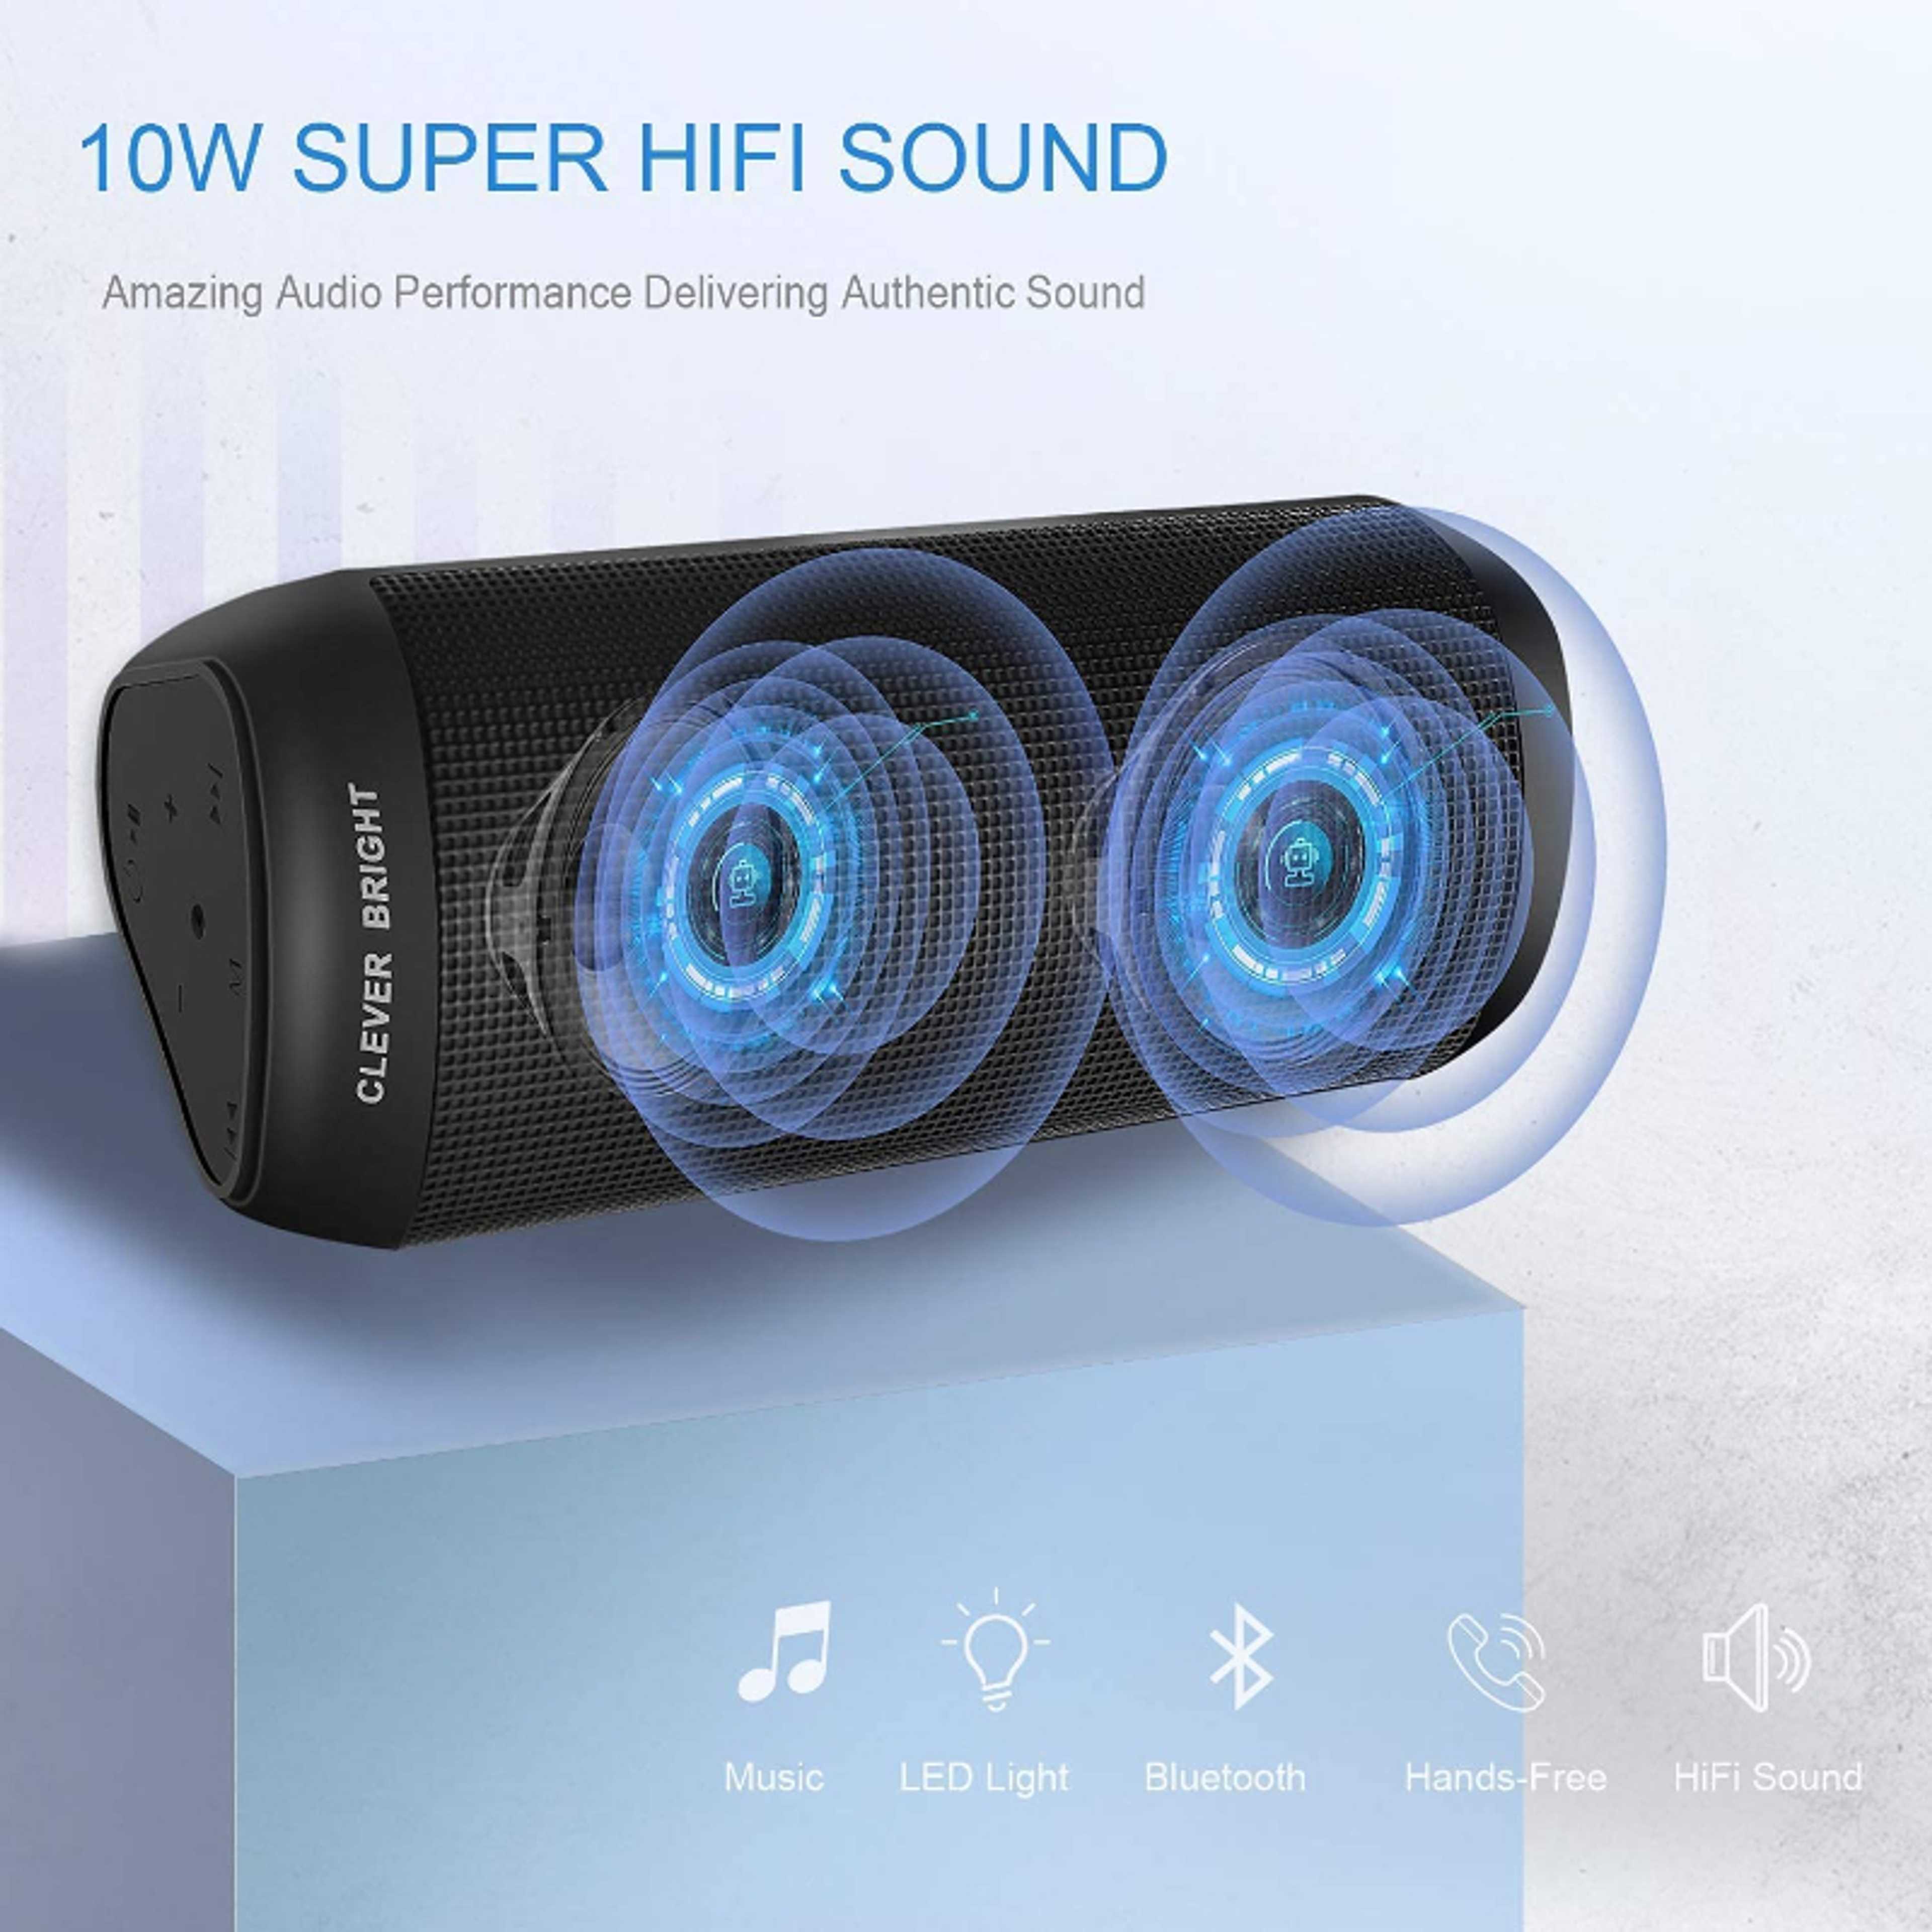 Clever Bright Portable Wireless Bluetooth Speakers 7 LED Lights V5.0 Hi-Fi Bass Powerful Sound Built-In Microphone